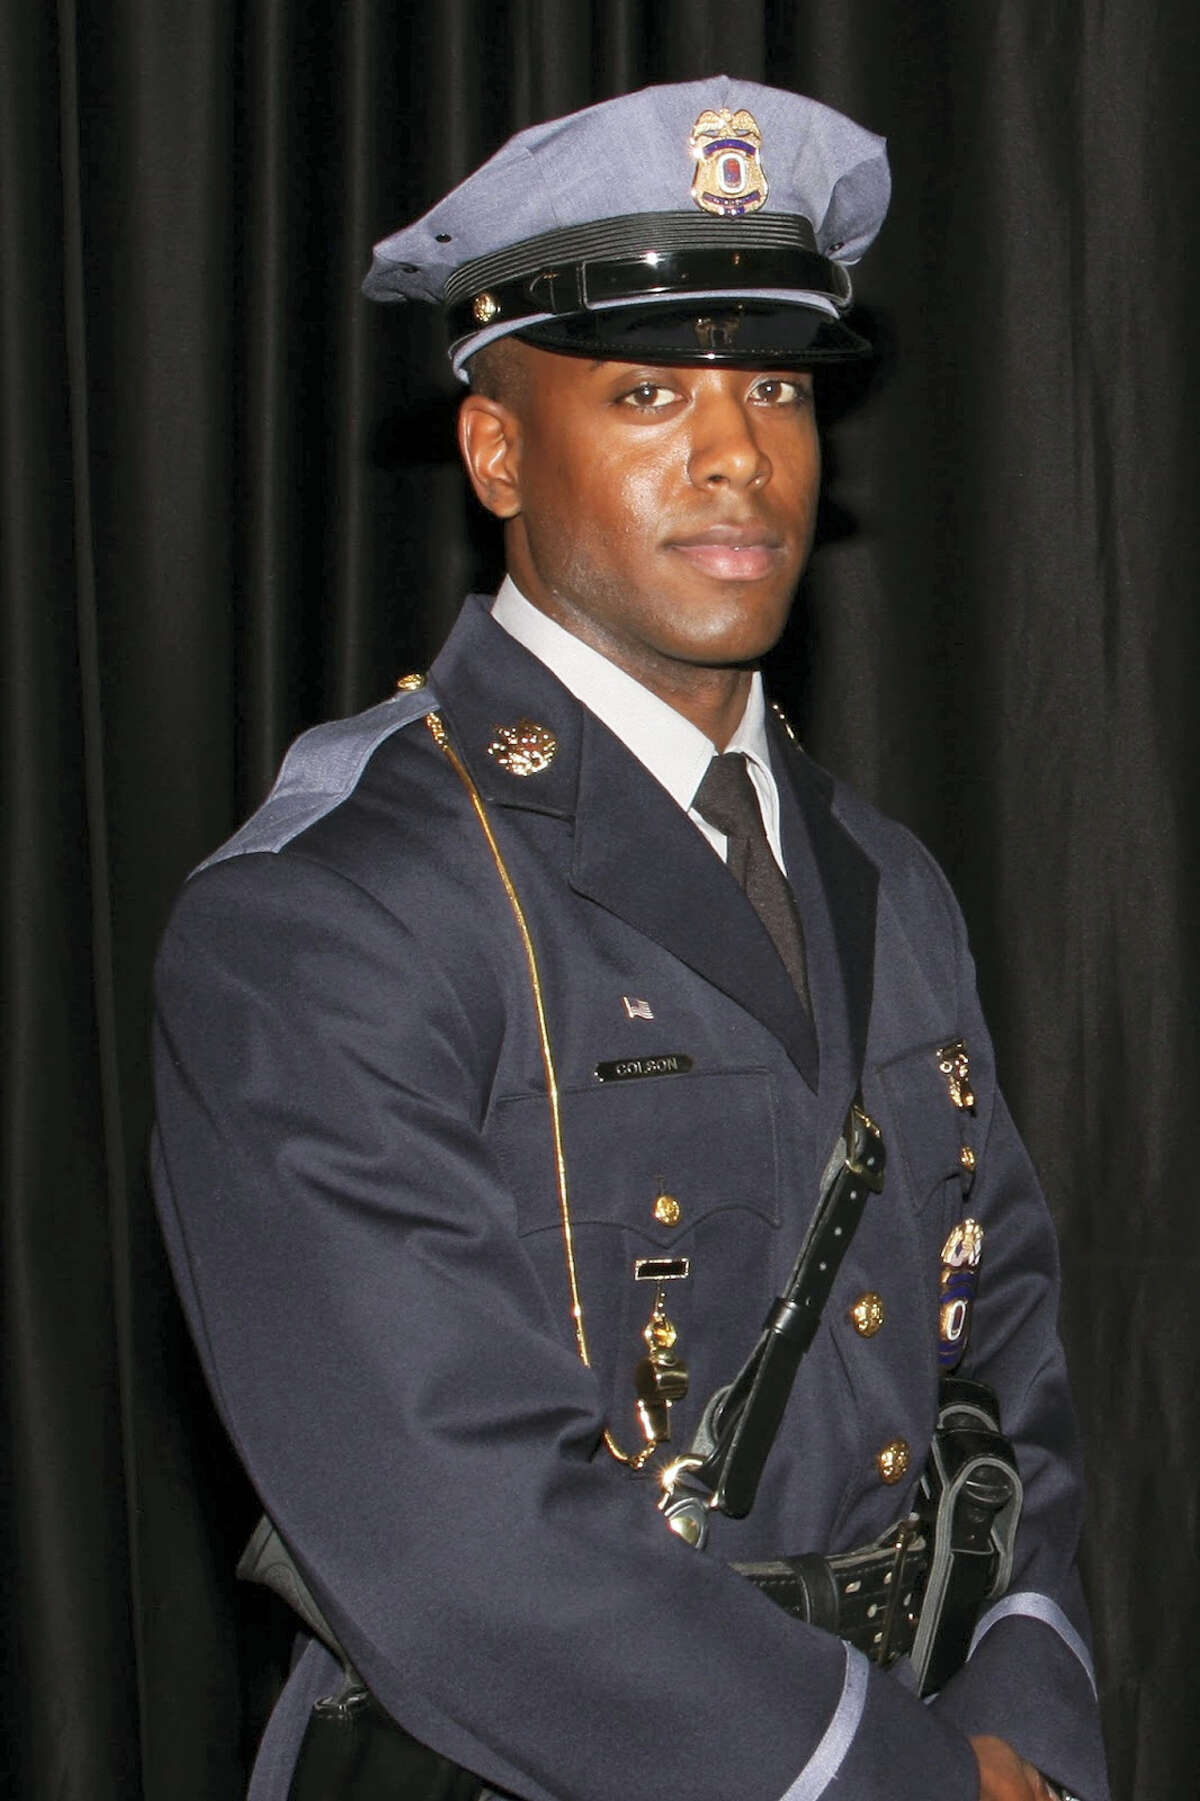 This undated photo provided by the Prince George’s County Police Department shows officer Jacai Colson, a 4-year veteran of the Maryland county’s police force. A gunman fired outside a Maryland police station on Sunday, March 13, 2016, prompting a gun battle that killed Colson and wounded the suspect, authorities said.